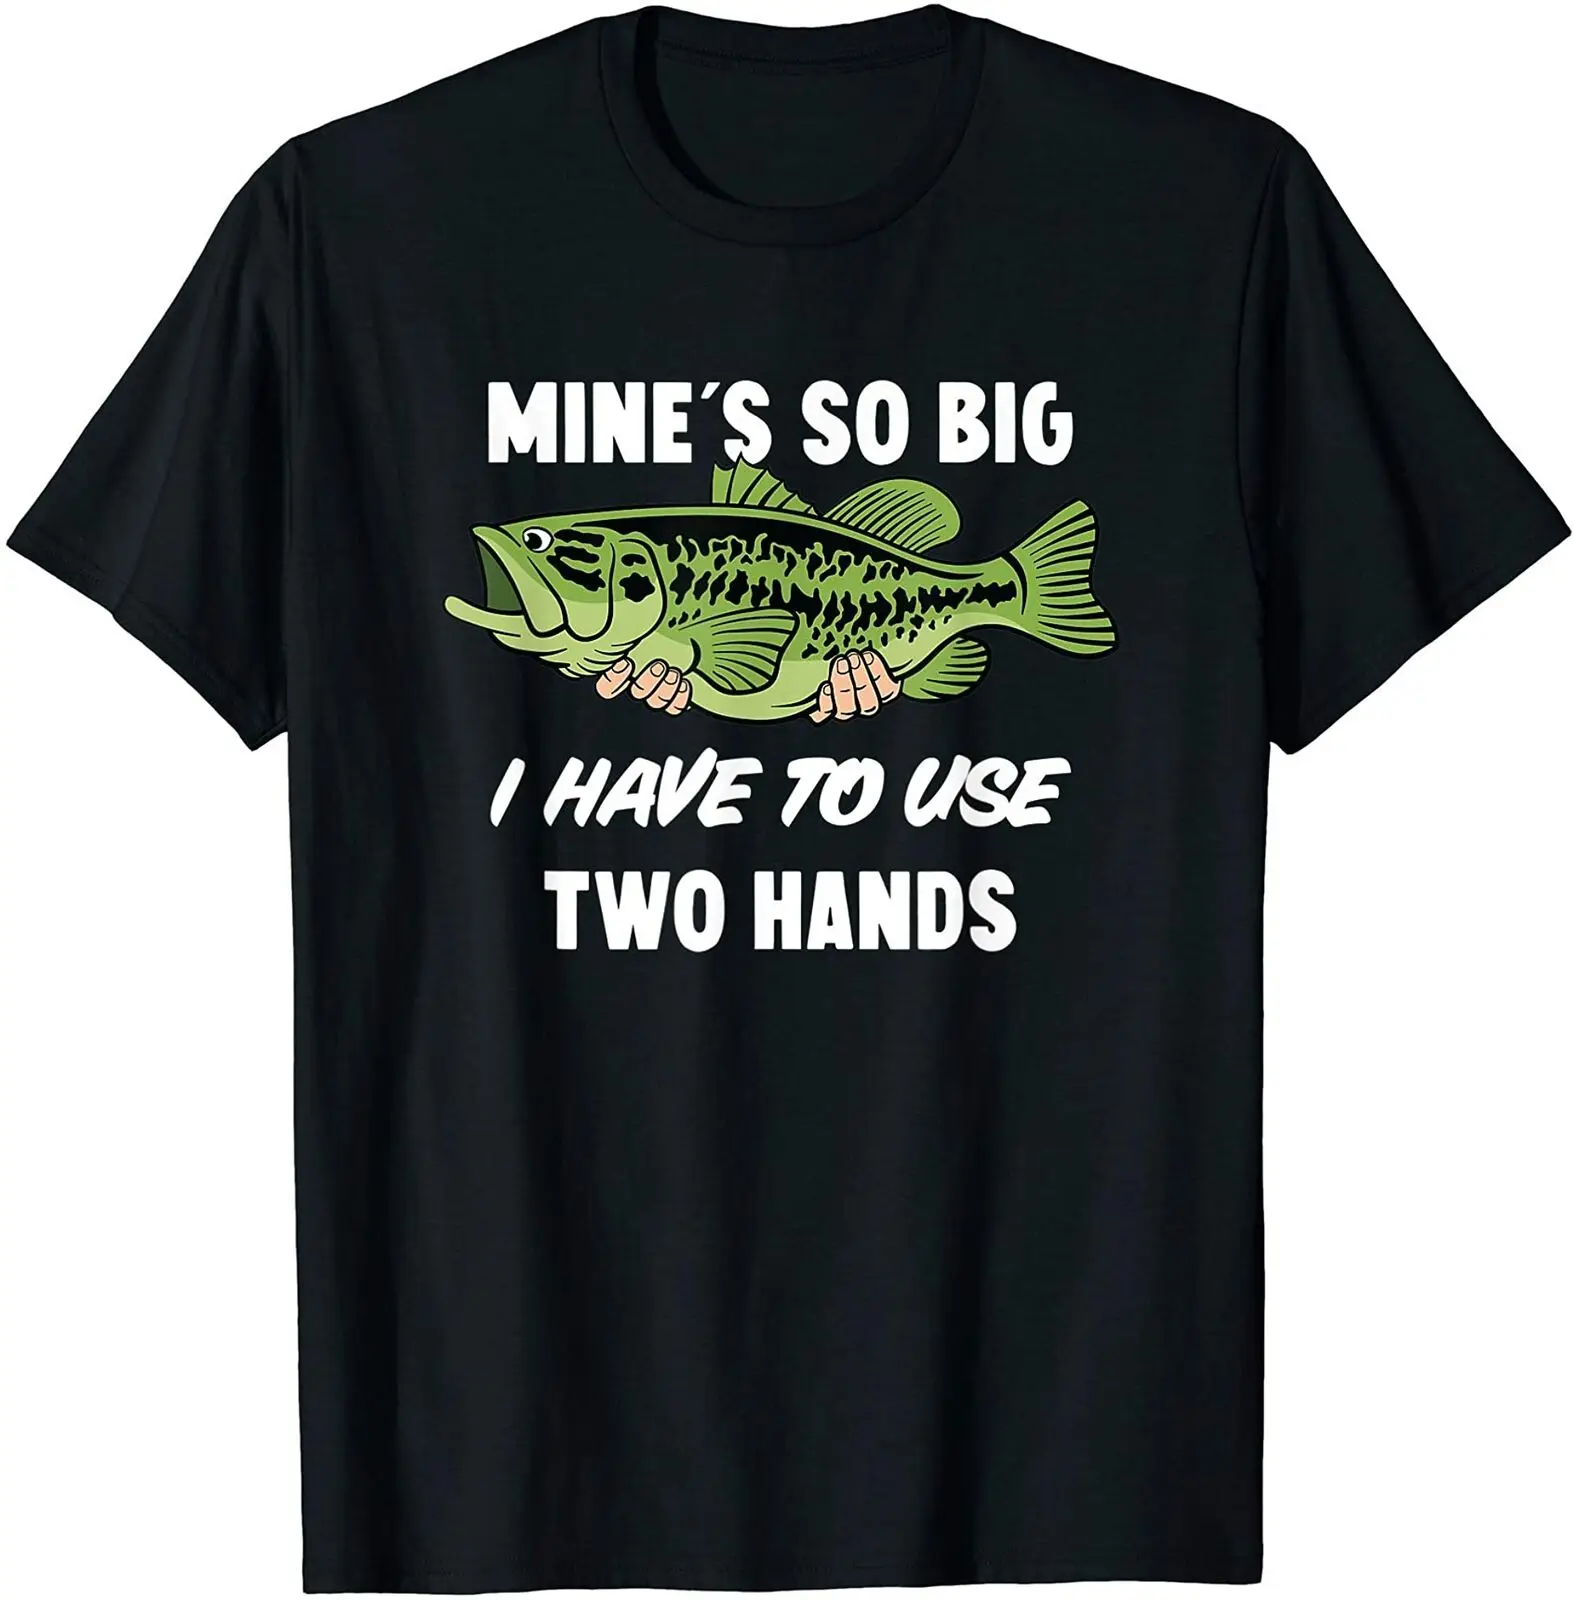 

Mine's So Big I Have to Use Two Hands Funny Bass Fishing T-Shirt Size S-3XL